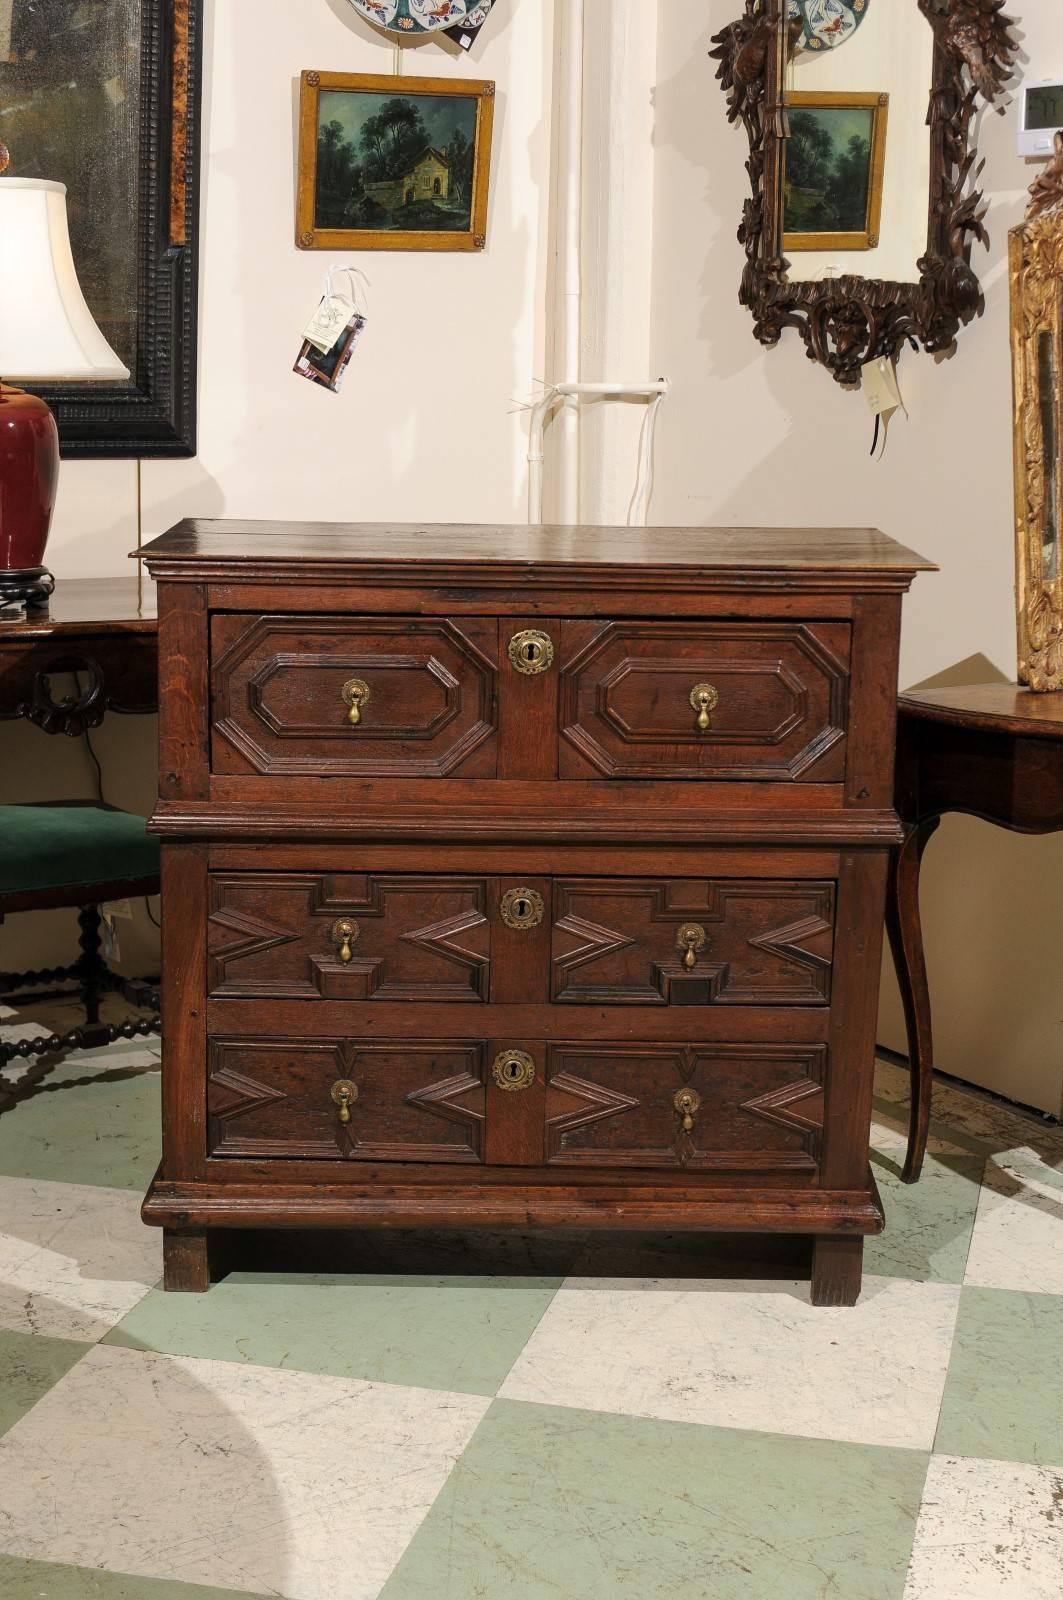 Jacobean style English oak cottage chest with three-drawer, geometric carving and brass tear drop pulls.

William Word Antiques: Atlanta's source for antique interiors since 1956.